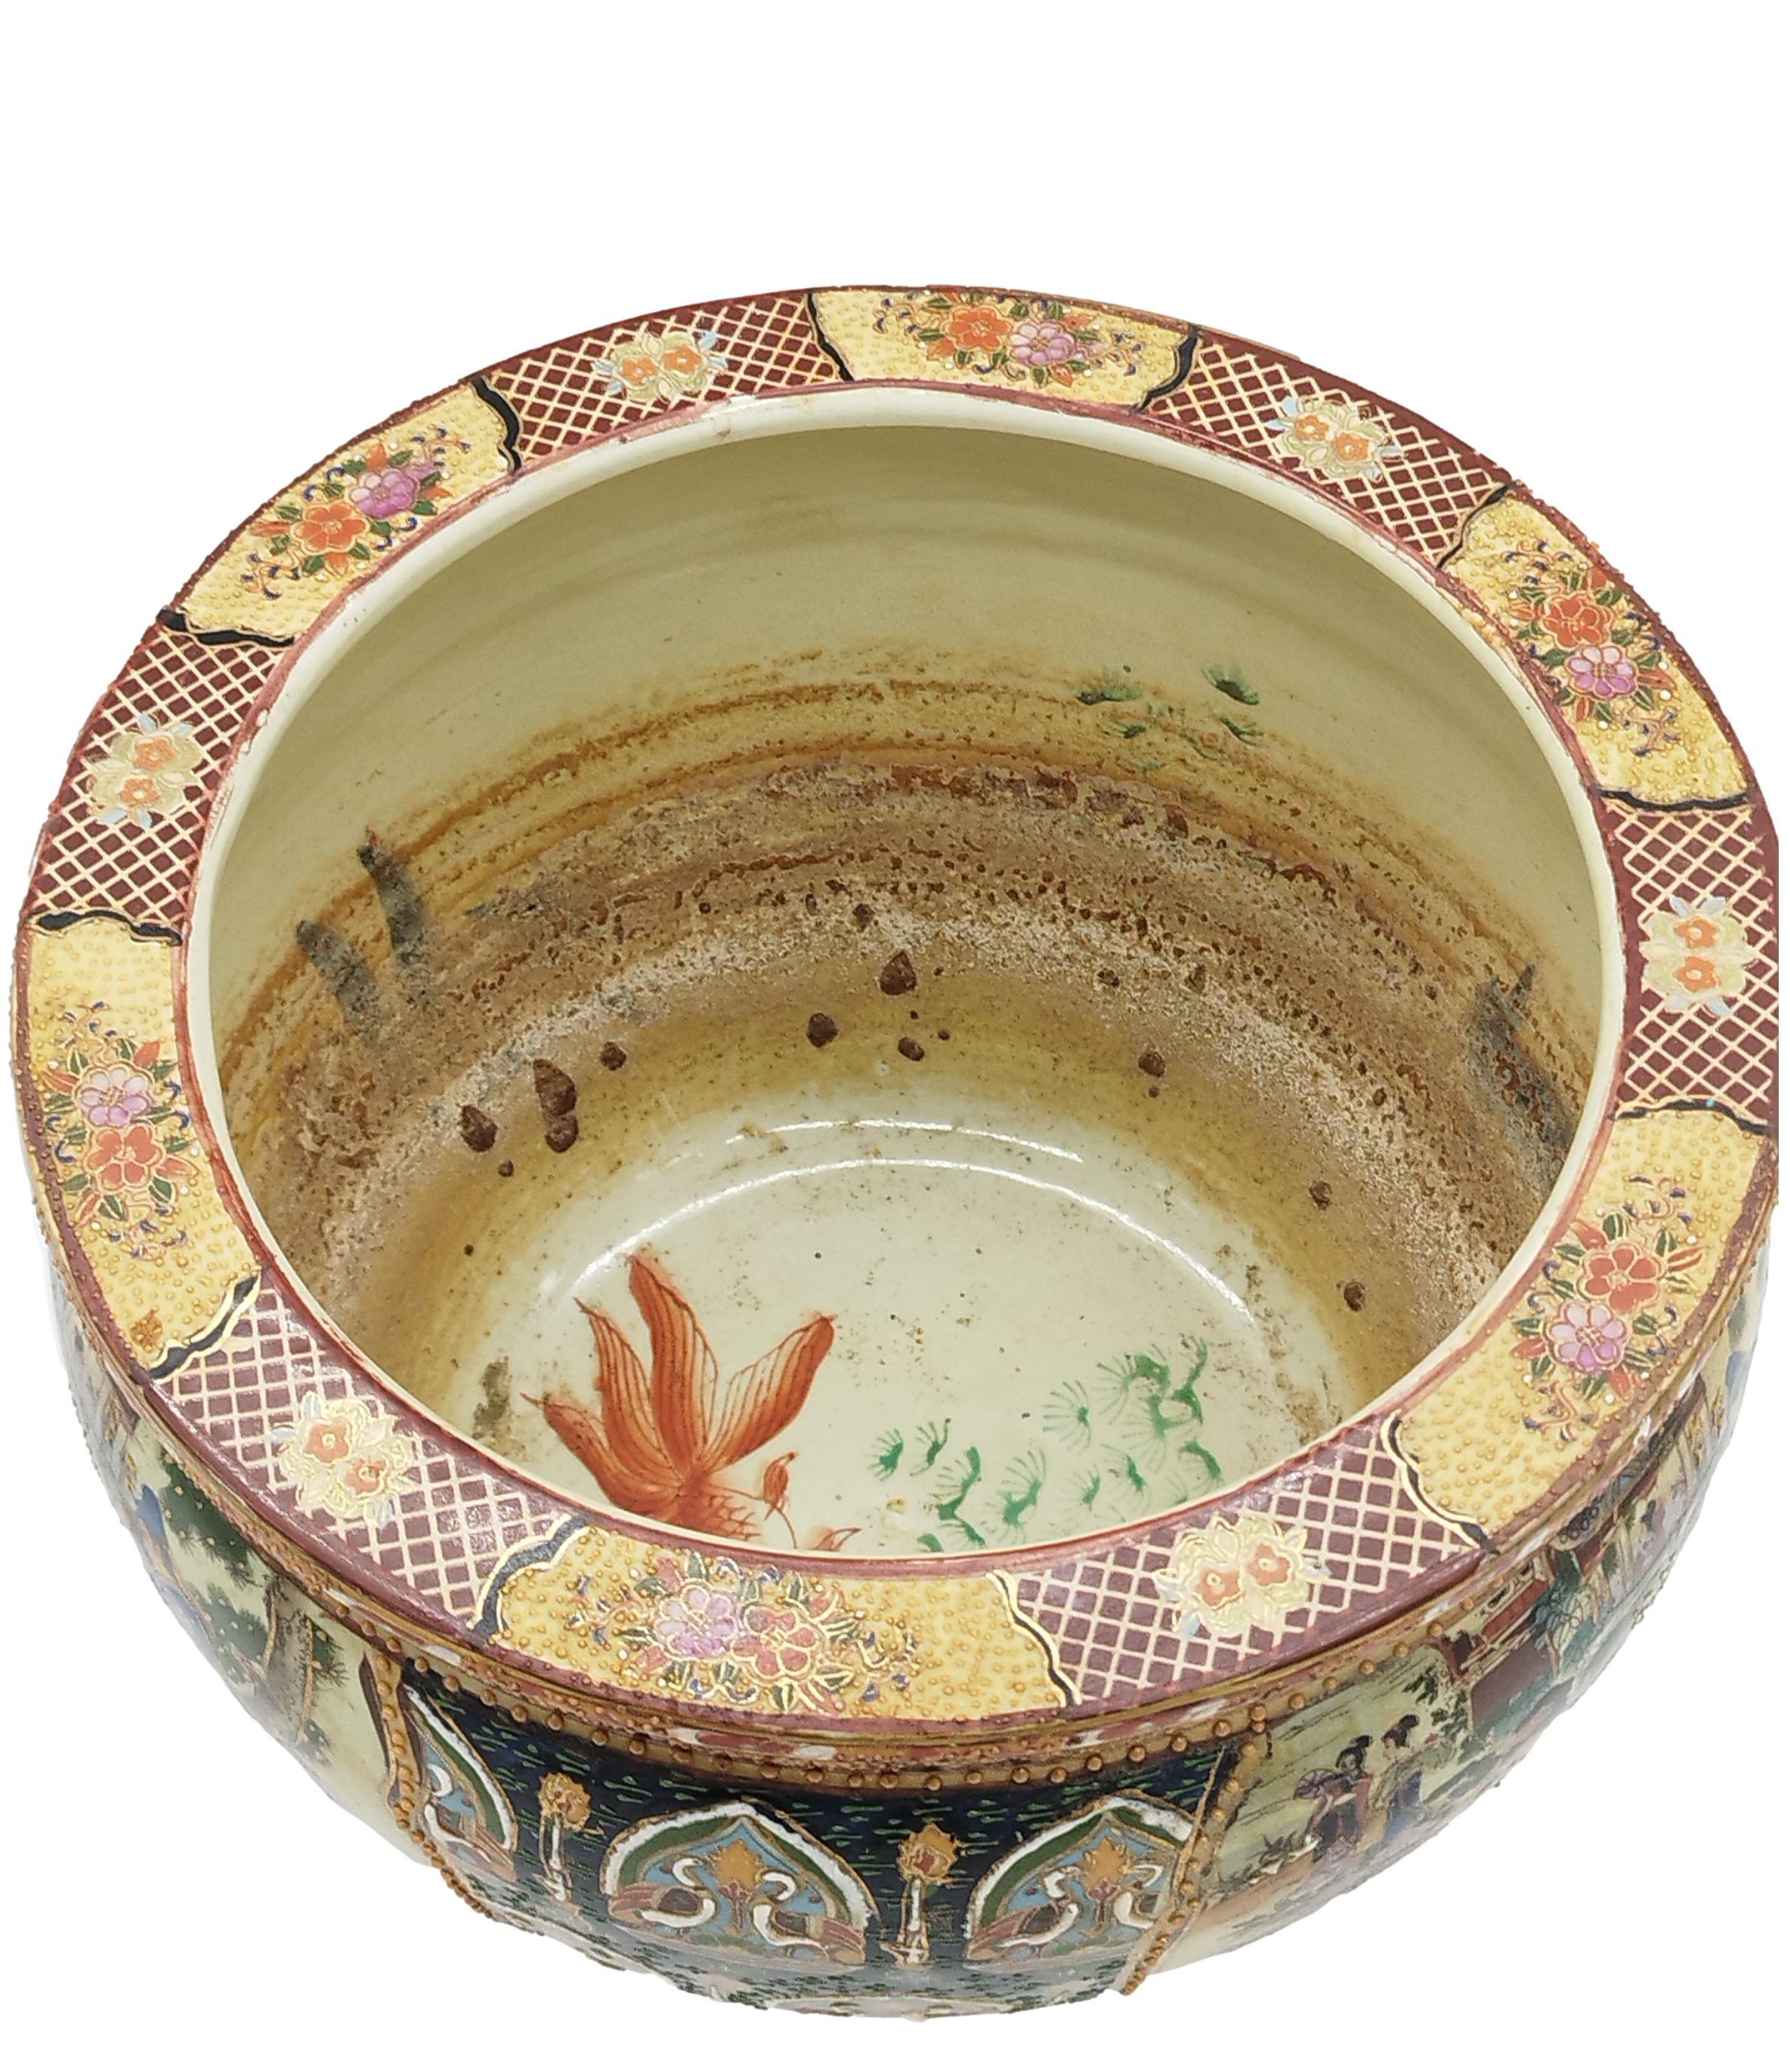 Mid-Century Modern Chinese Porcelain Fish Bowl or Planter with Oriental Decorations, China, 1960s For Sale